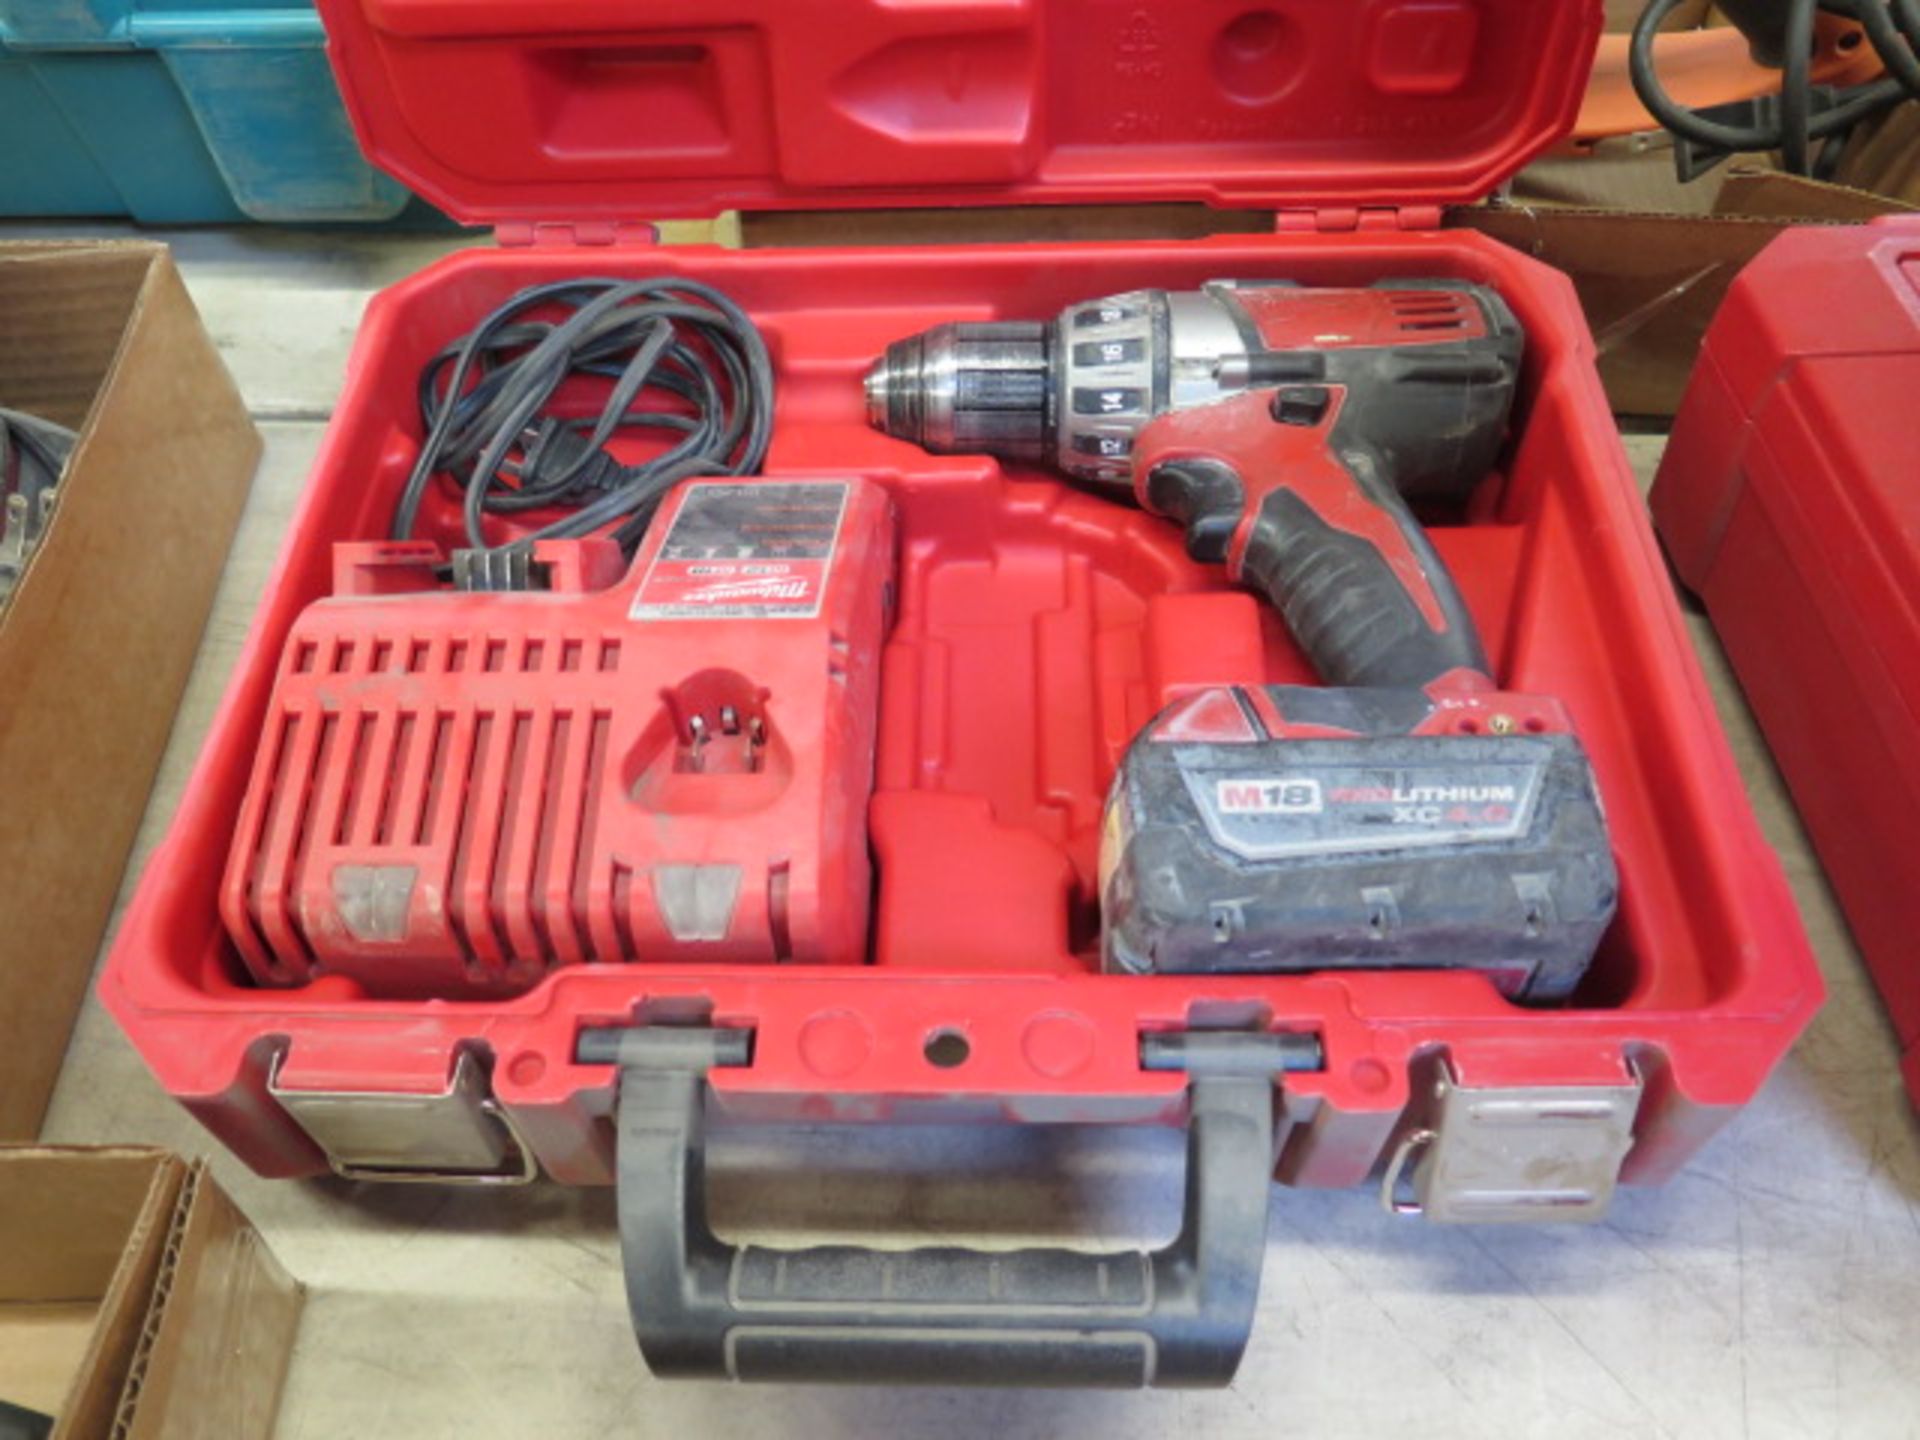 Milwaukee 18Volt Drill Kits (2) w/ Chargers (SOLD AS-IS - NO WARRANTY) - Image 4 of 5